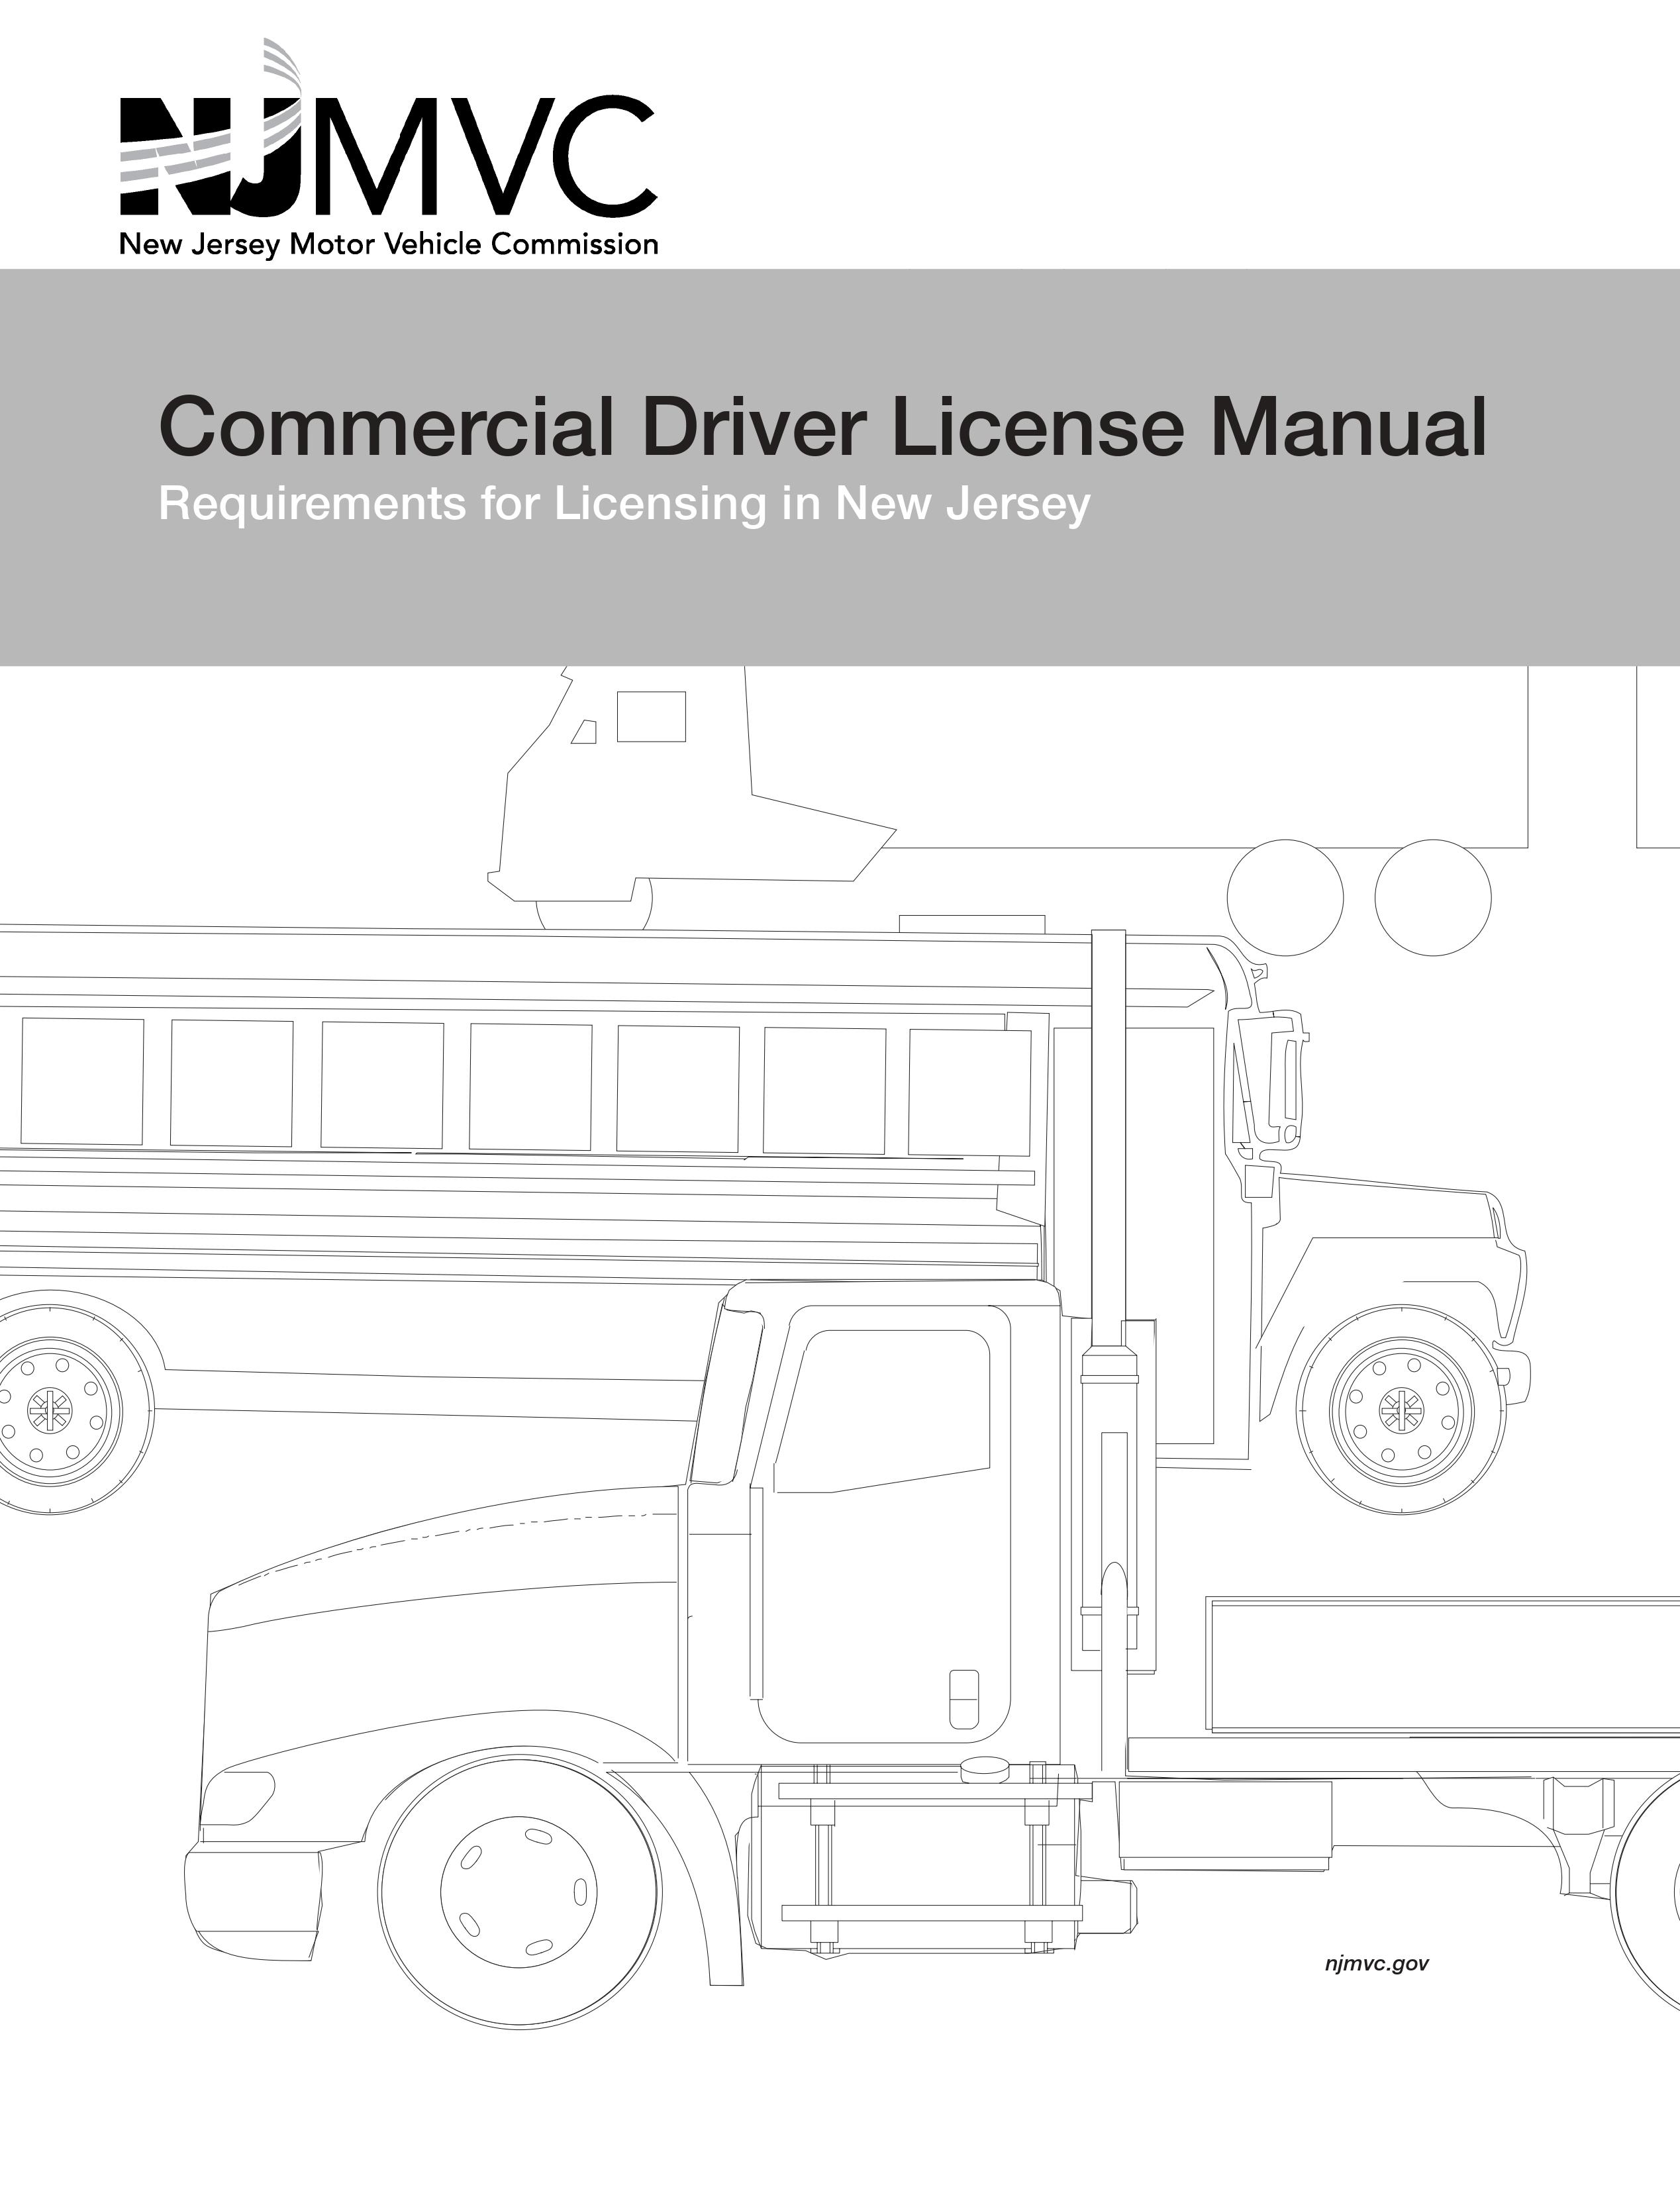 New Jersey's CDL Manual